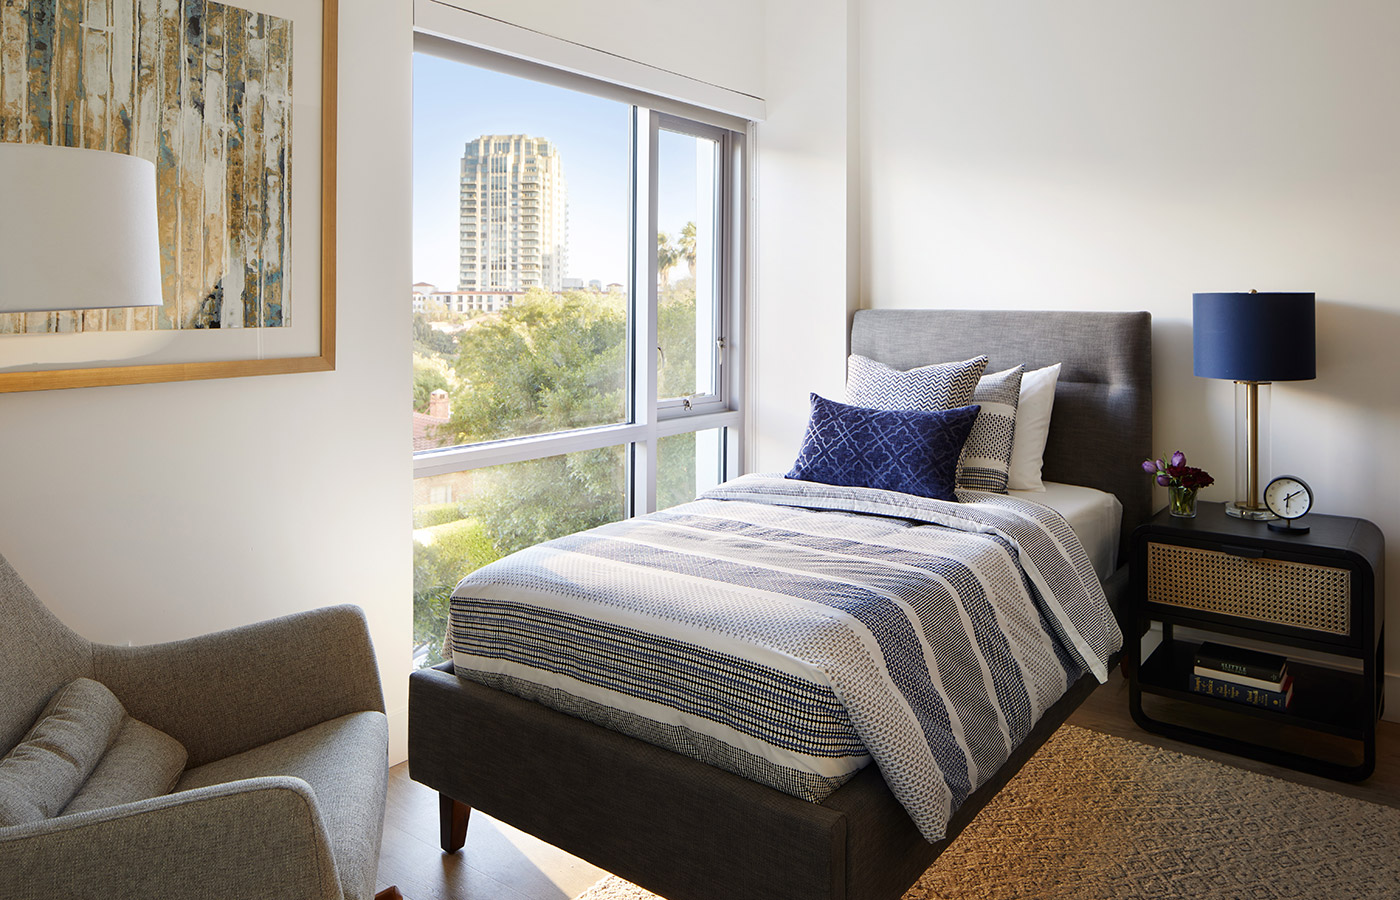 An apartment at The Watermark at Westwood Village.